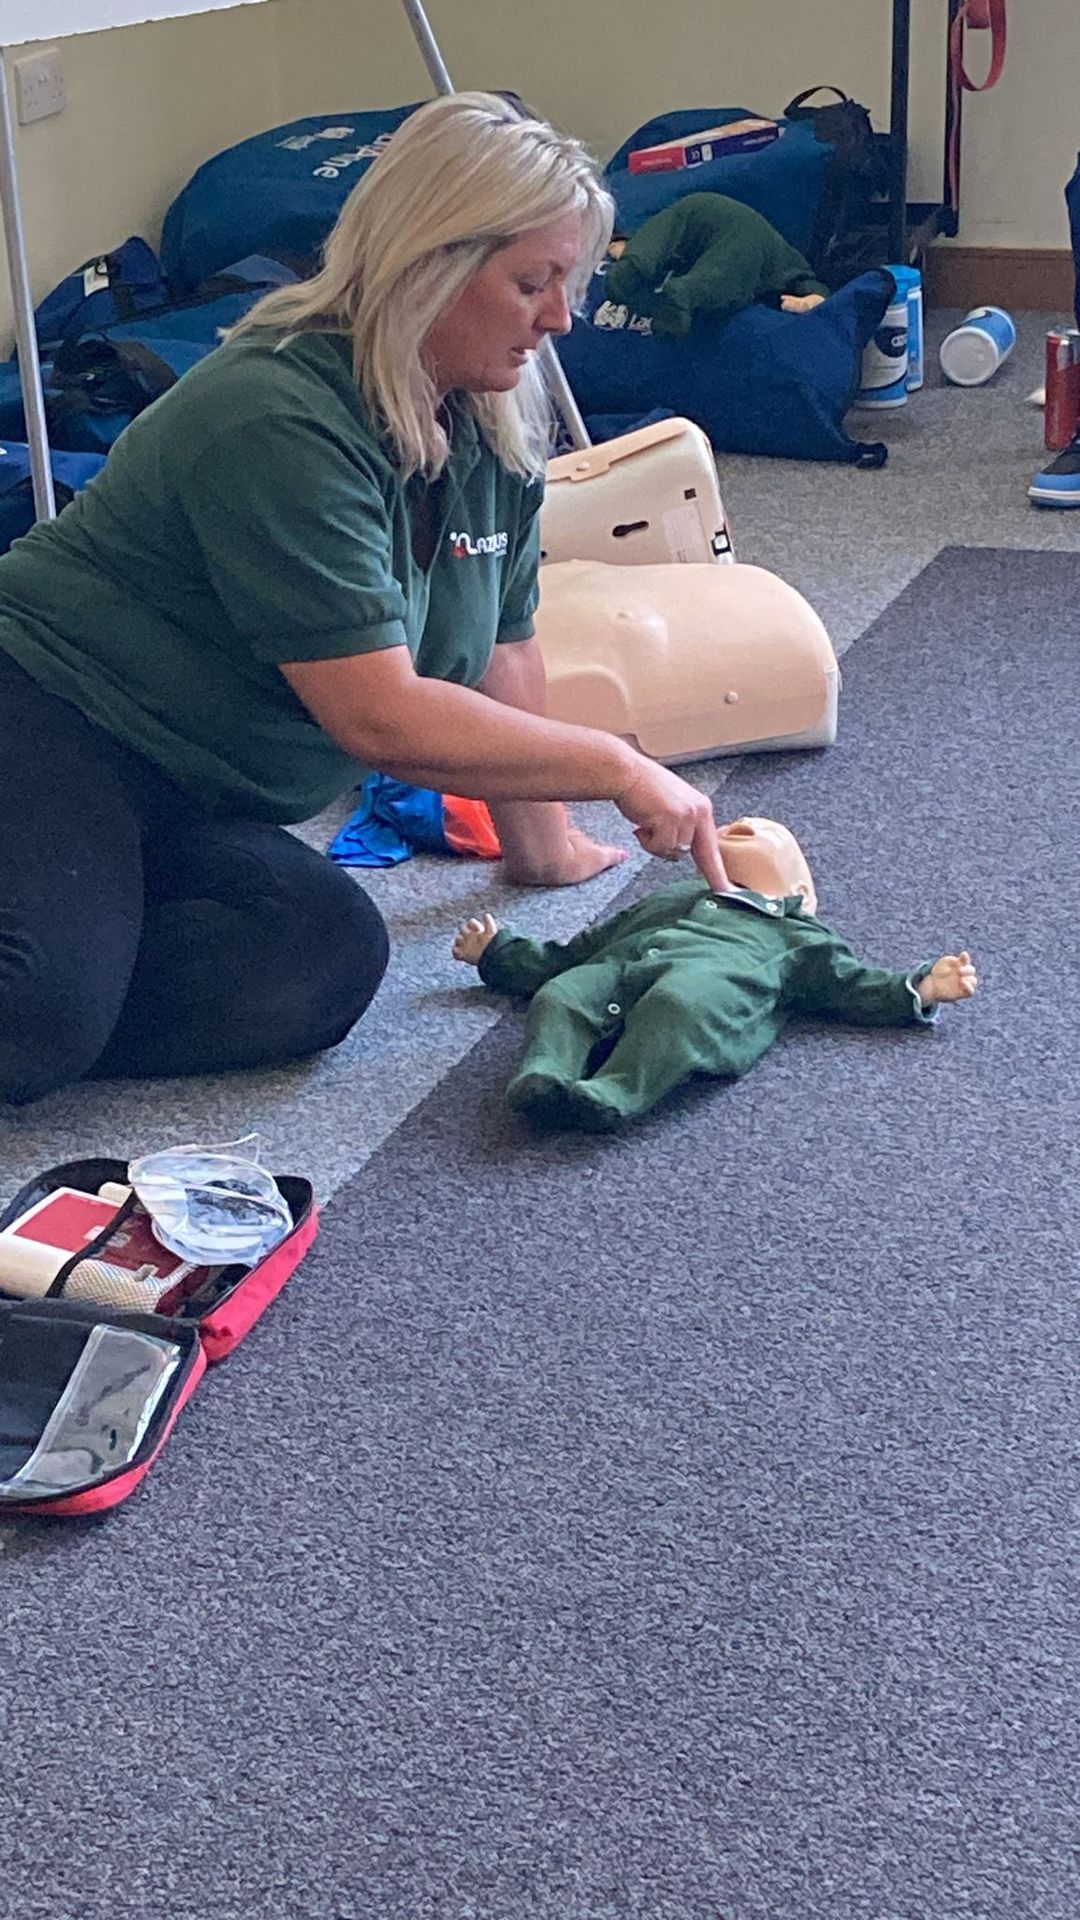 12 Hour Paediatric First Aid Course15th & 16th July 09:30 - 4:30 daily